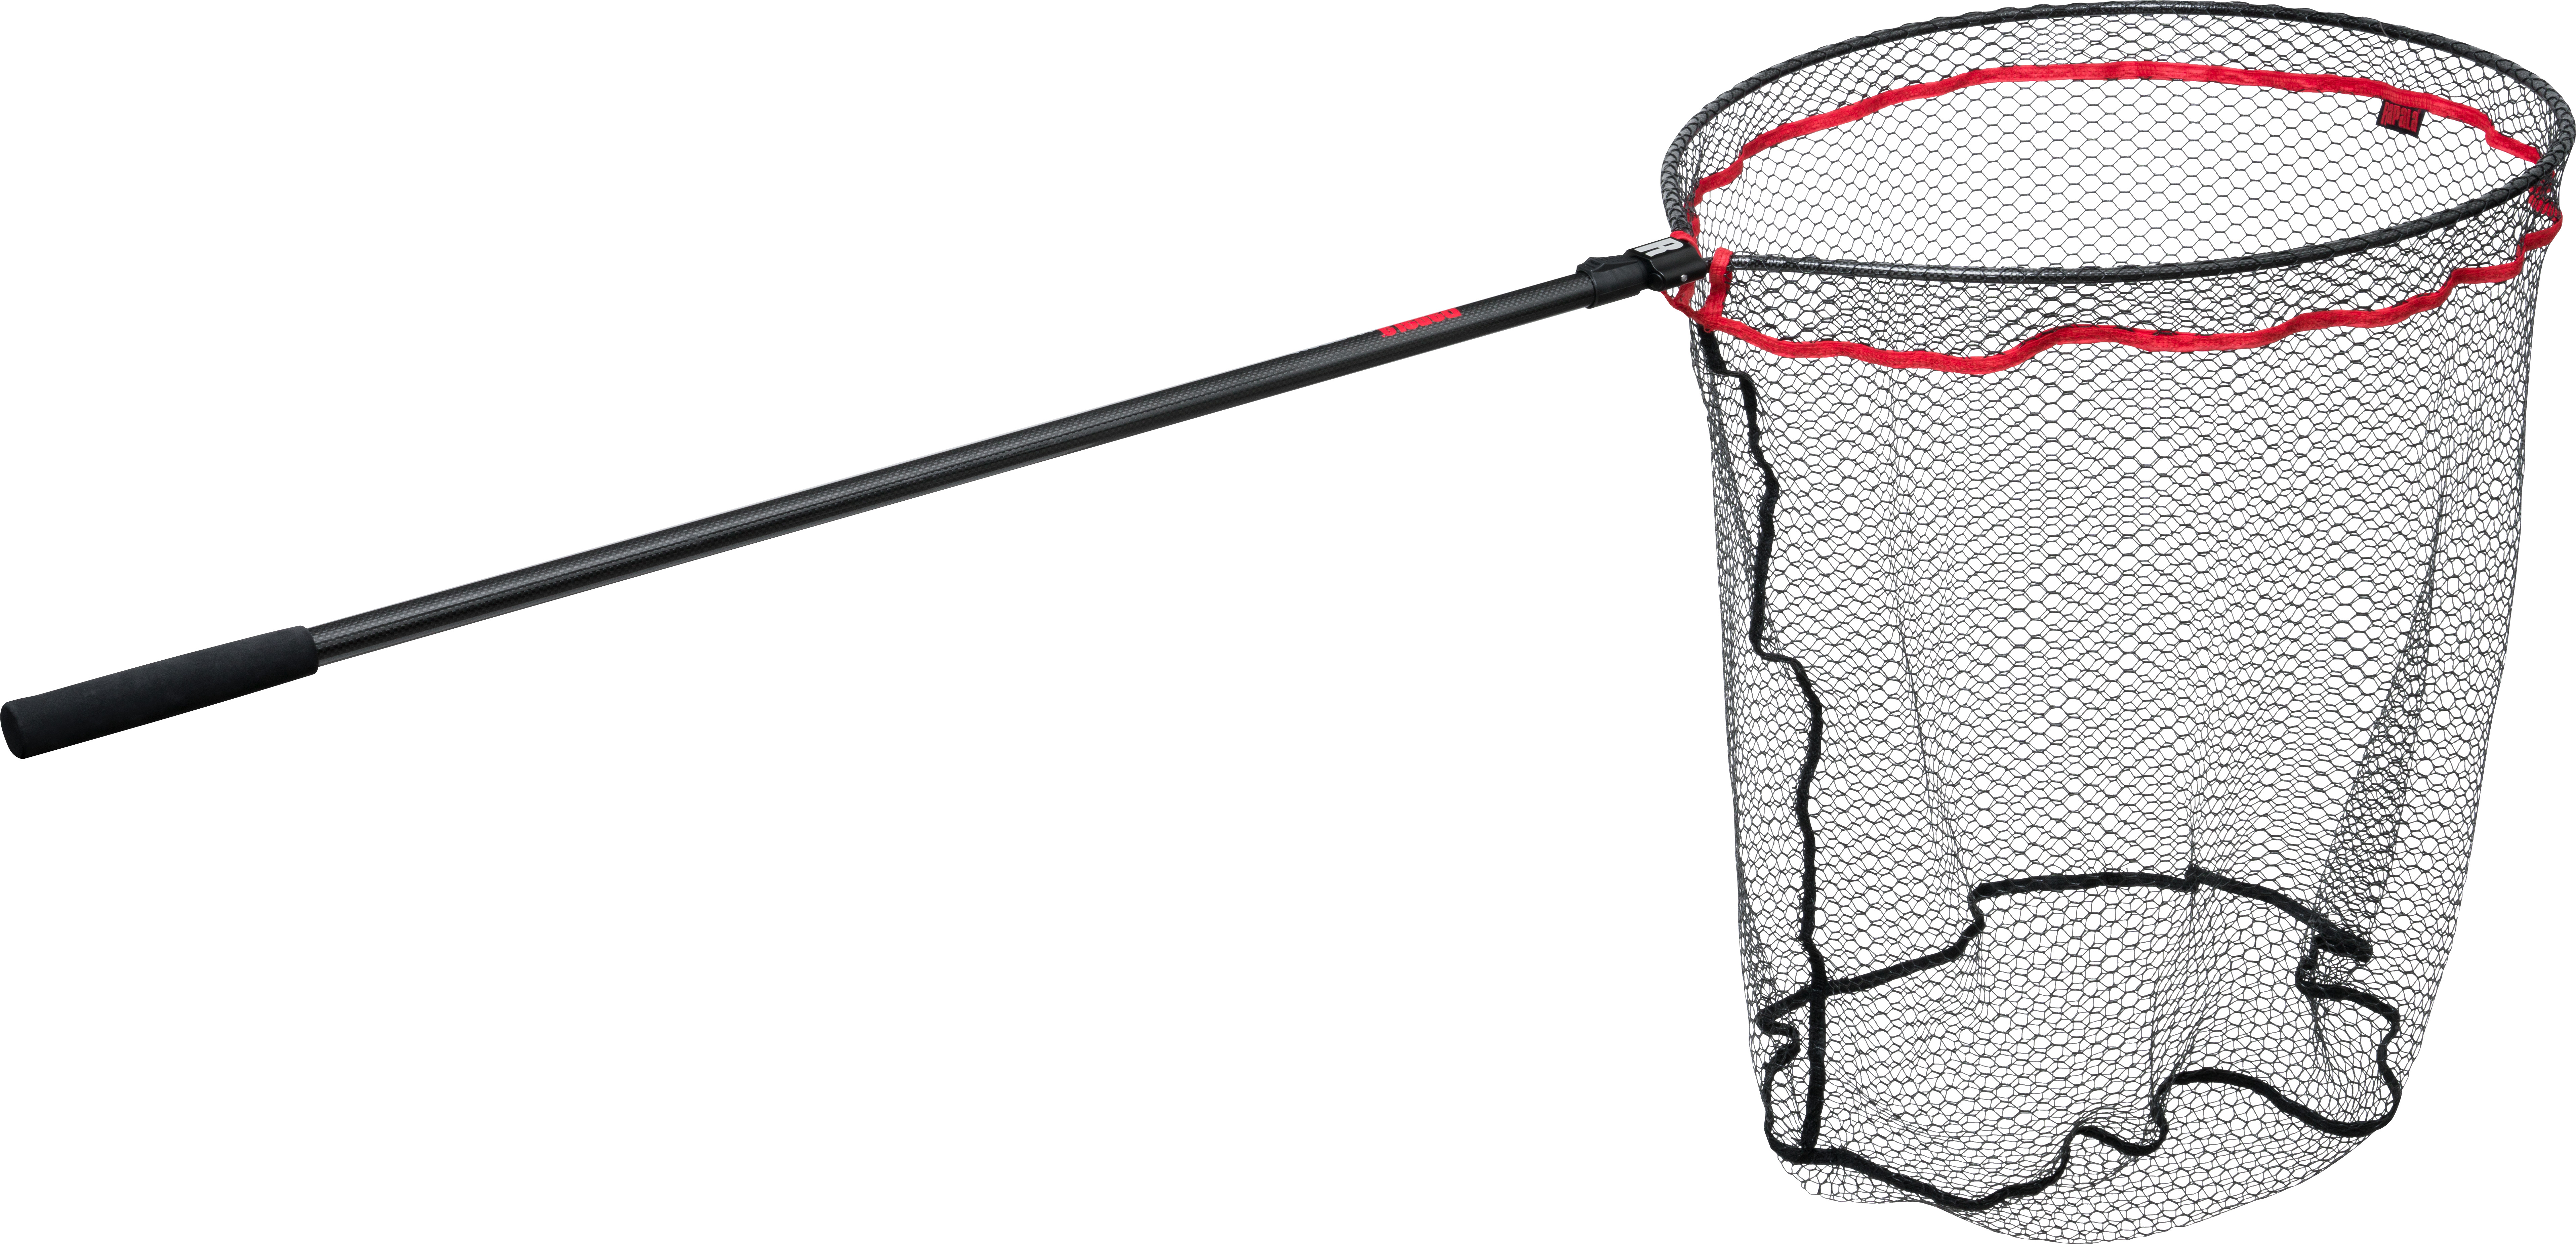 Rapala Carbon All-Round Net XL, Landing Nets, Accessories